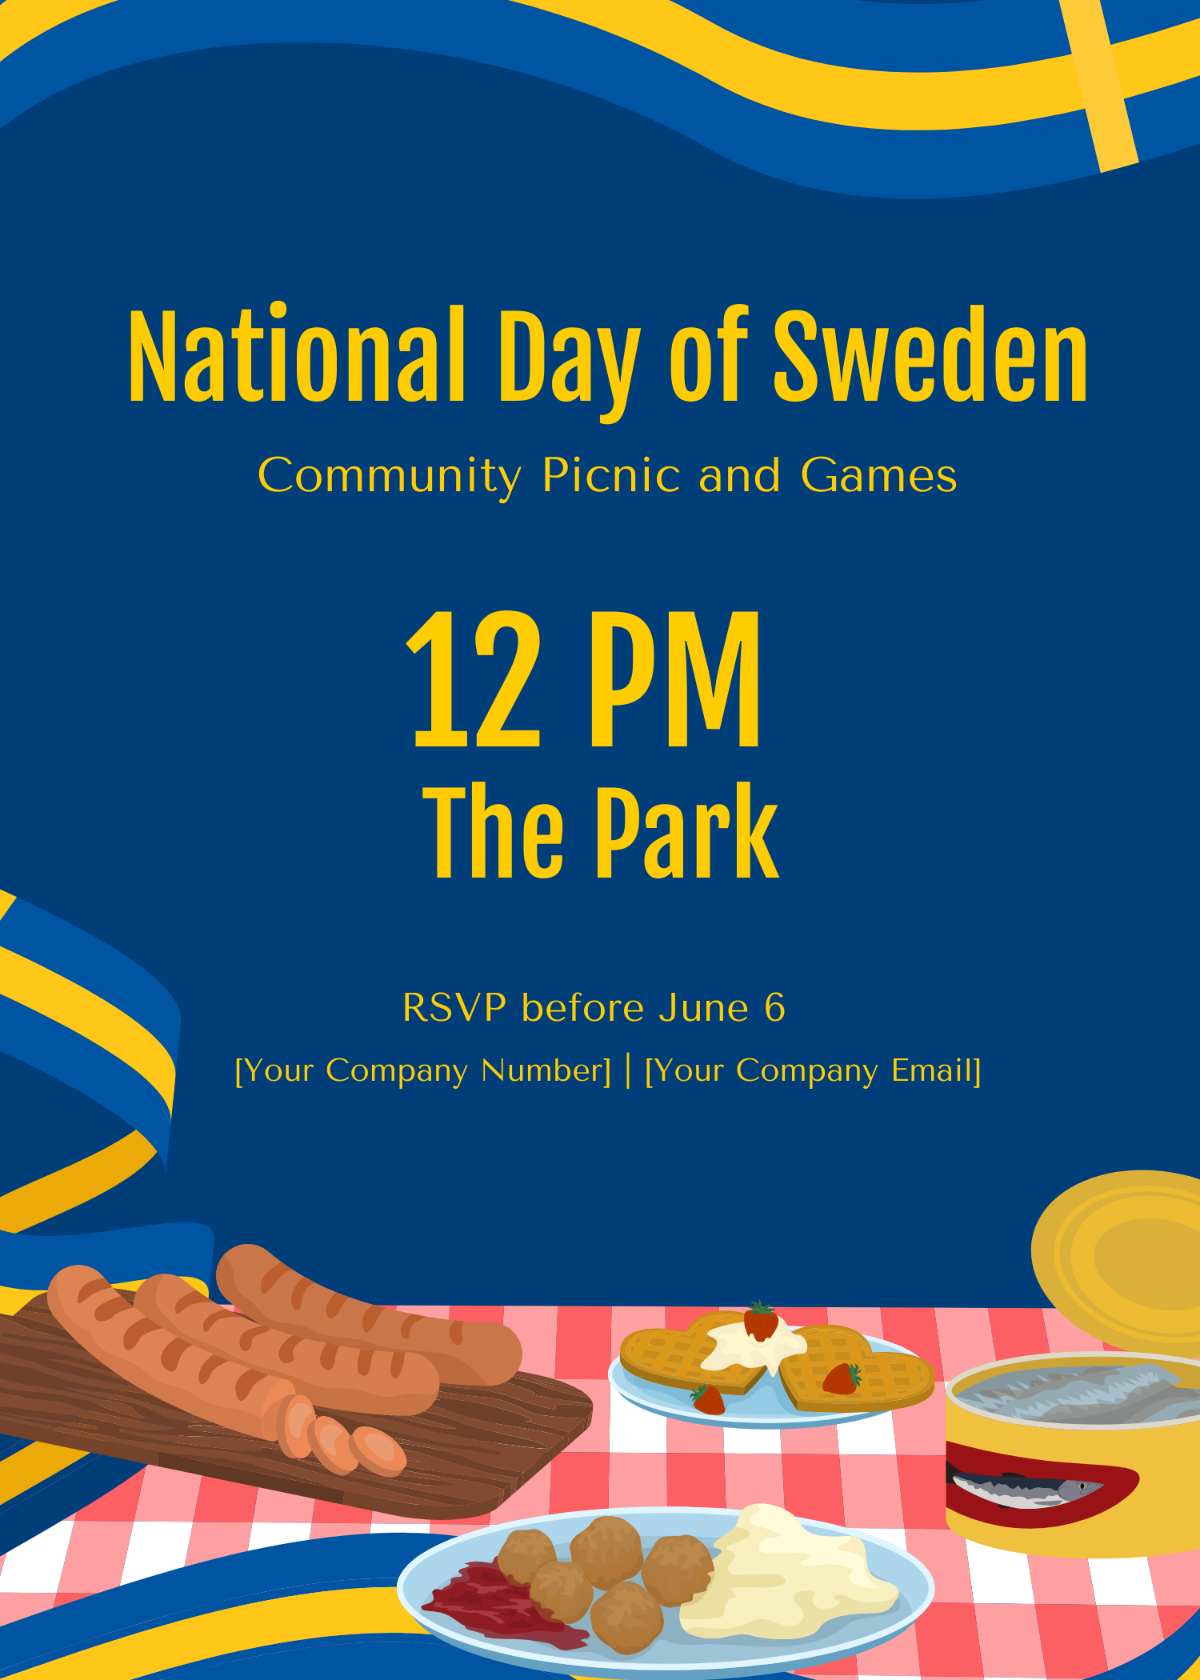 National Day of Sweden Invitation Card